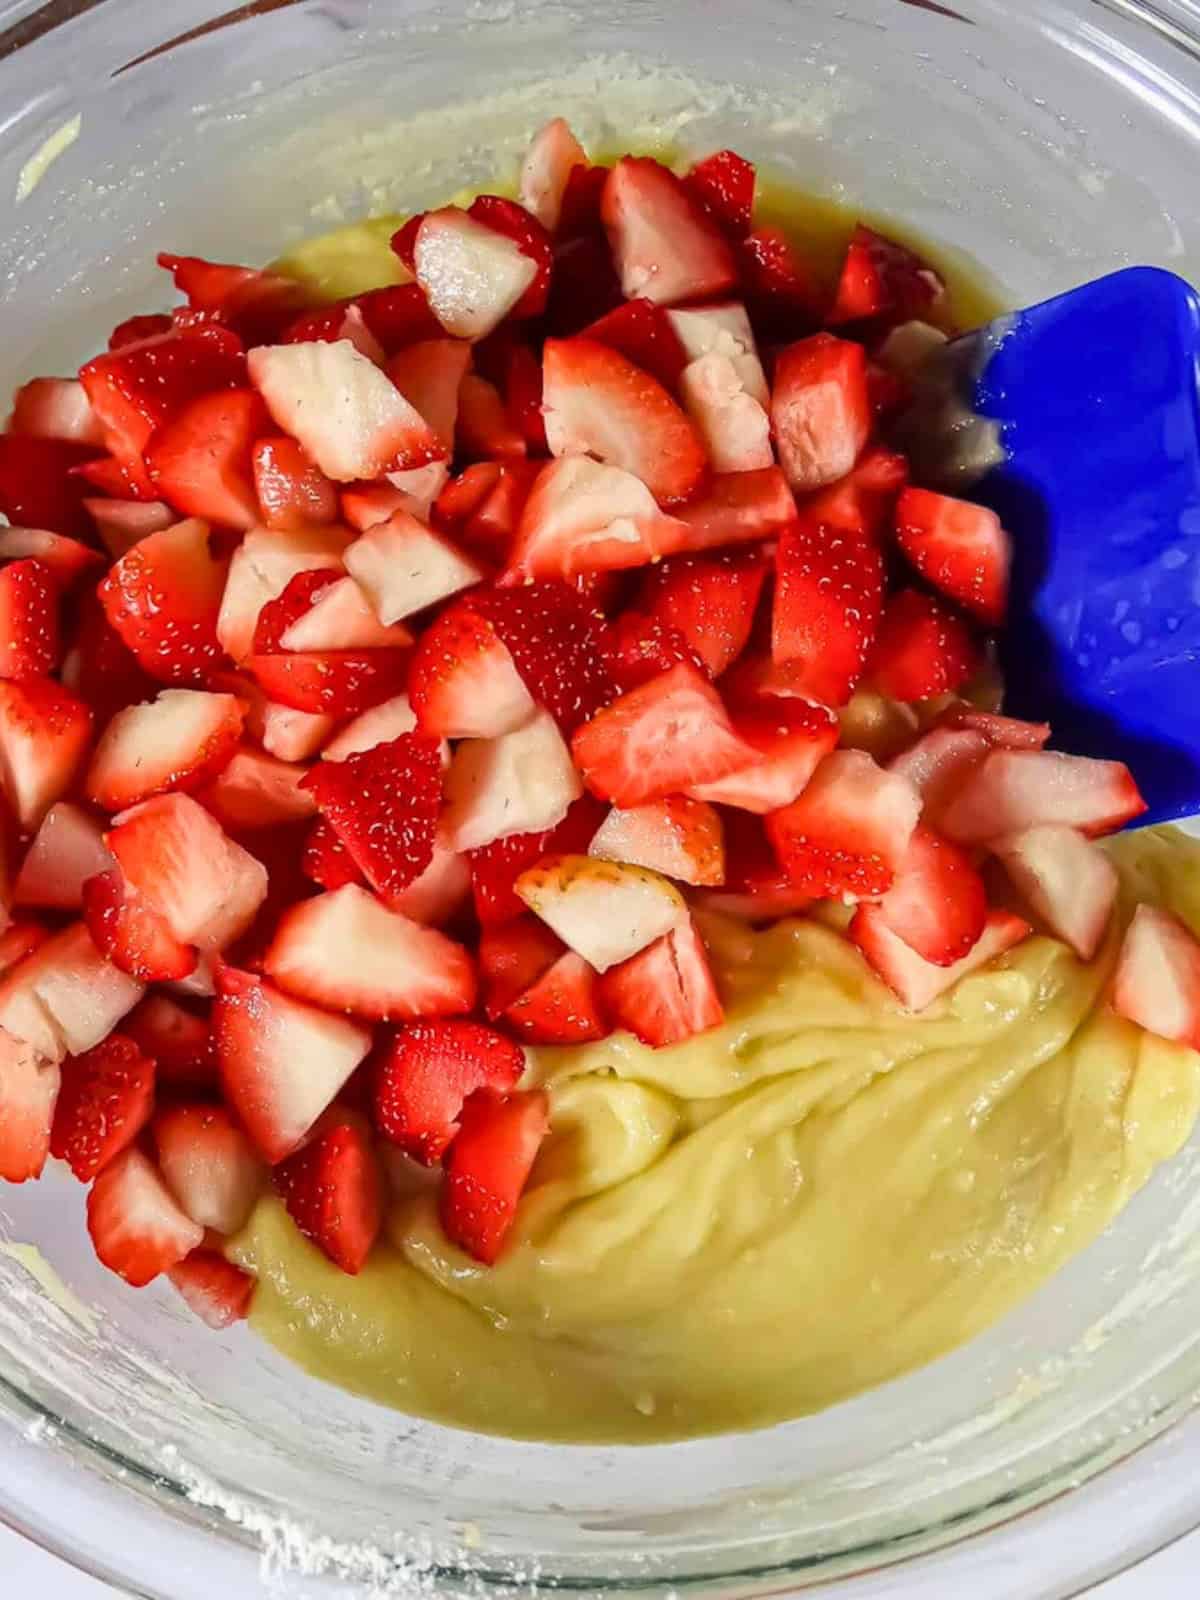 strawberries and muffin batter in a mixing bowl